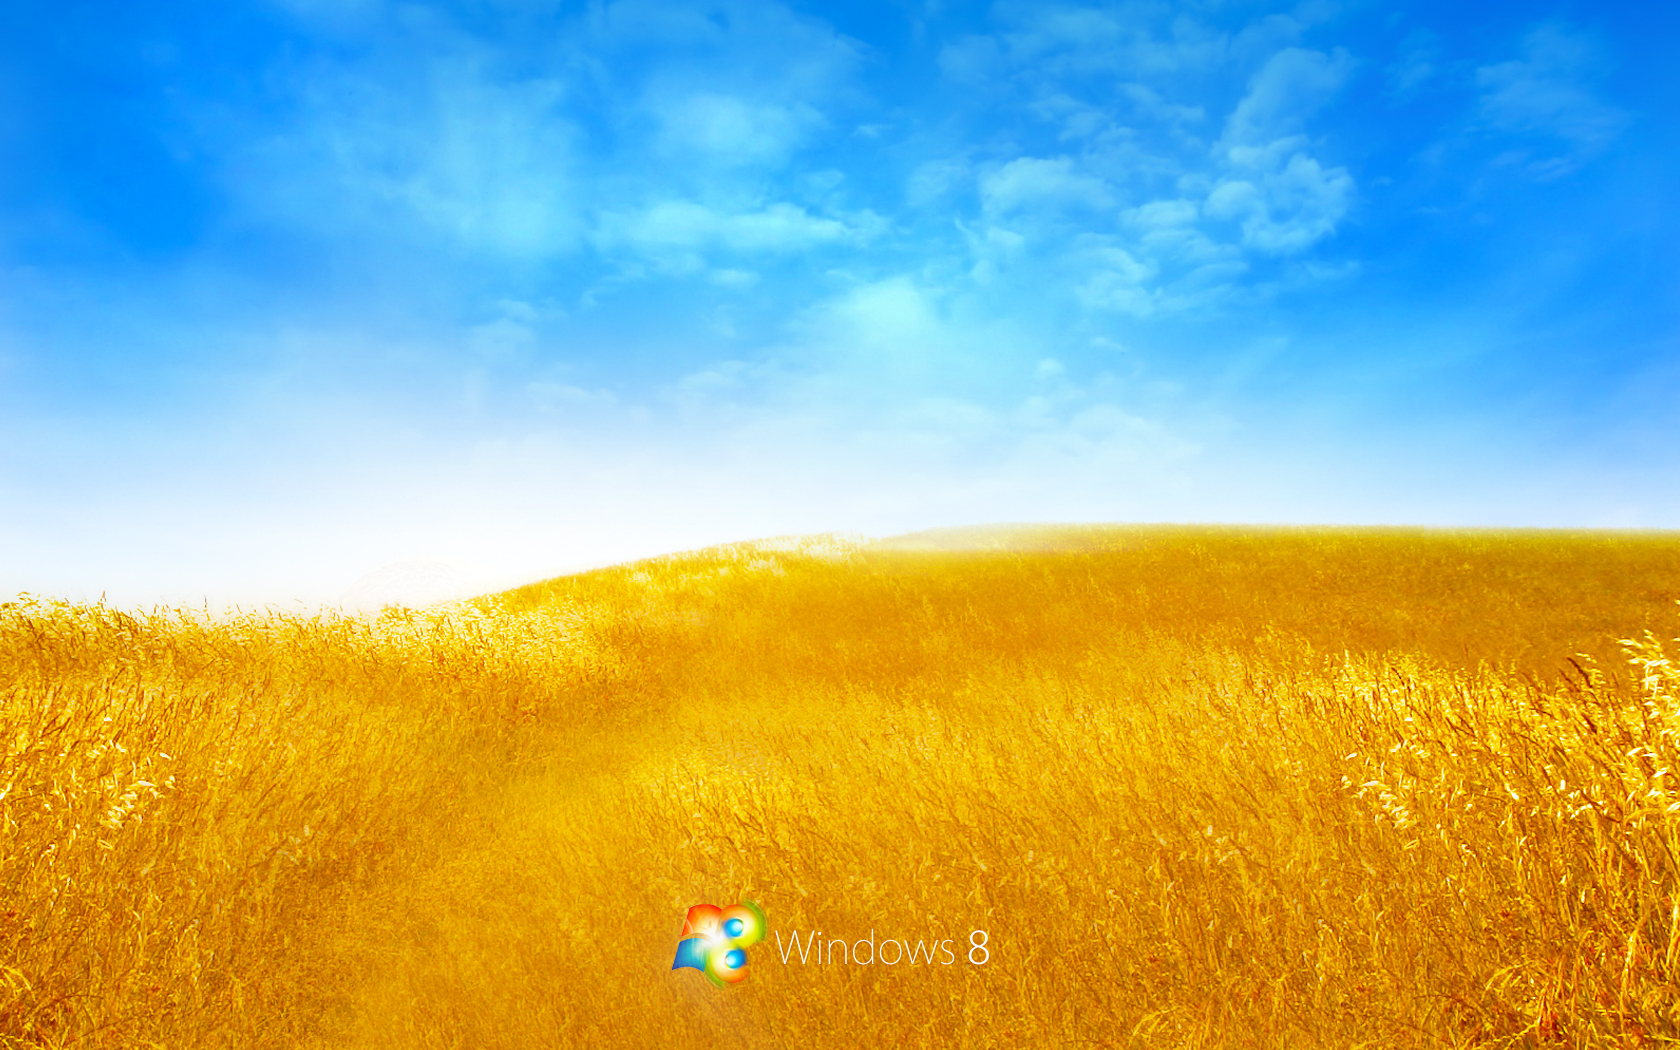 Download Microsoft Windows 8 Wallpapers Pack 3   wallpapers   TechMynd